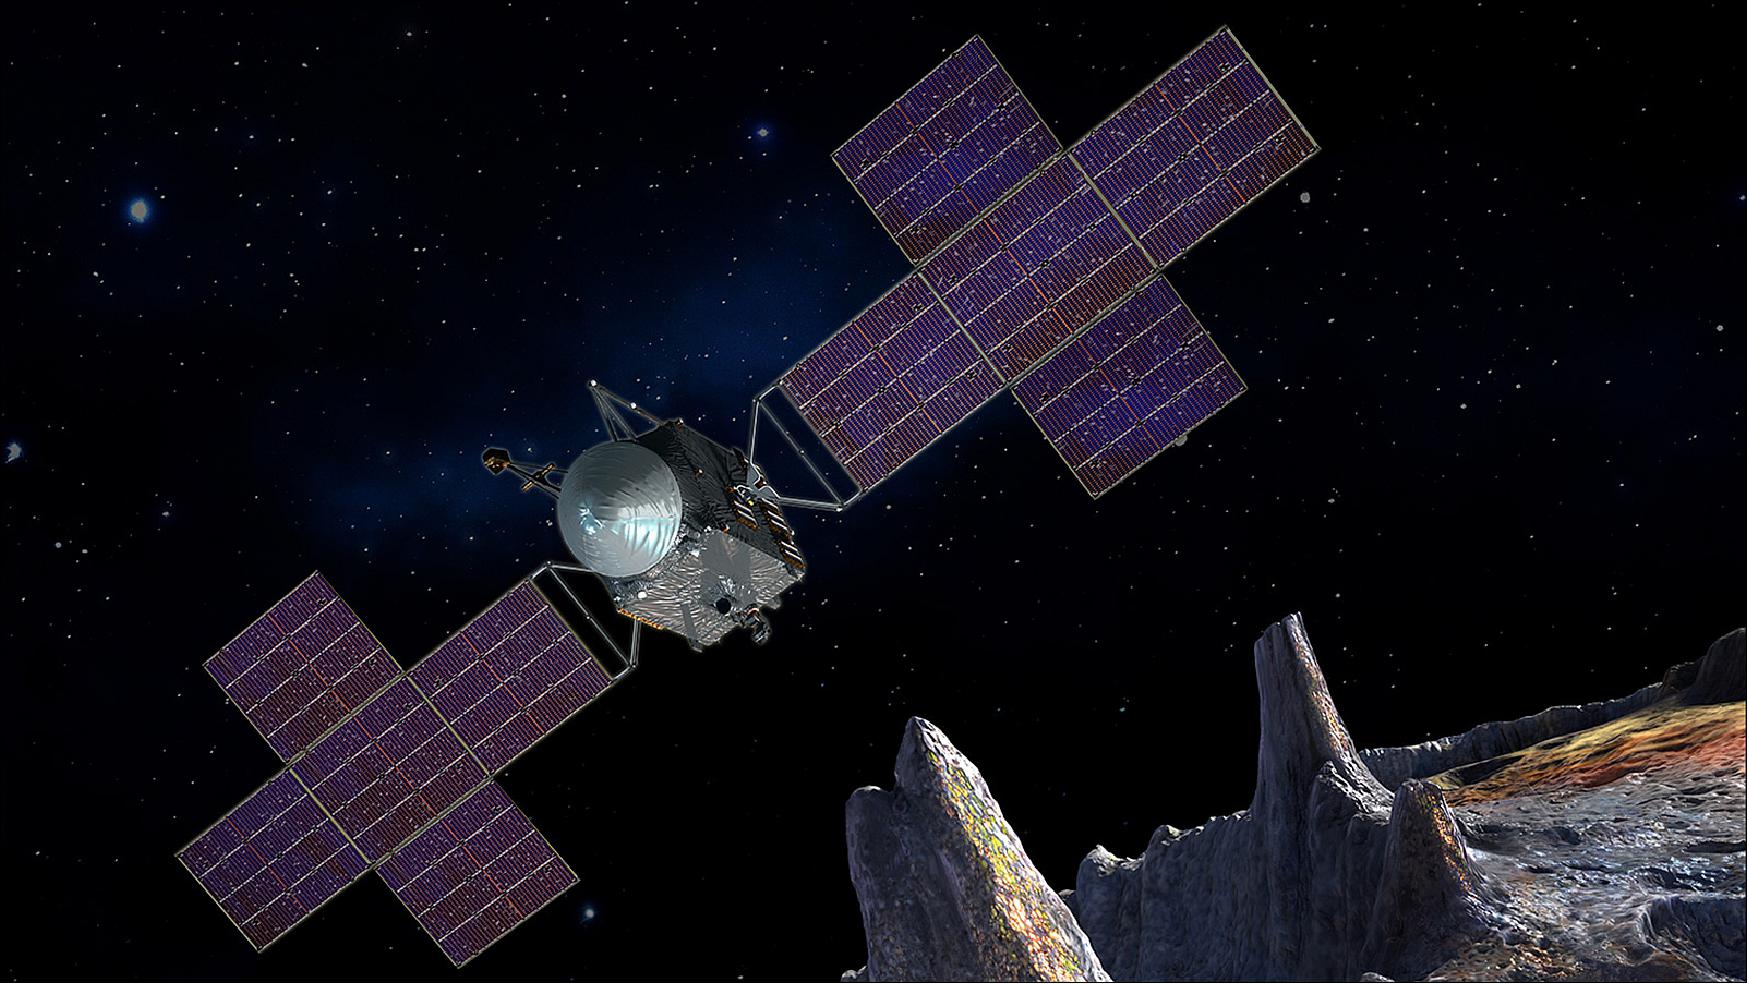 Figure 2: Artist's concept of the Psyche spacecraft, which will conduct a direct exploration of a metal asteroid Psyche, thought to be a stripped planetary core (image credit: SSL/ASU/P. Rubin/NASA/JPL-Caltech)